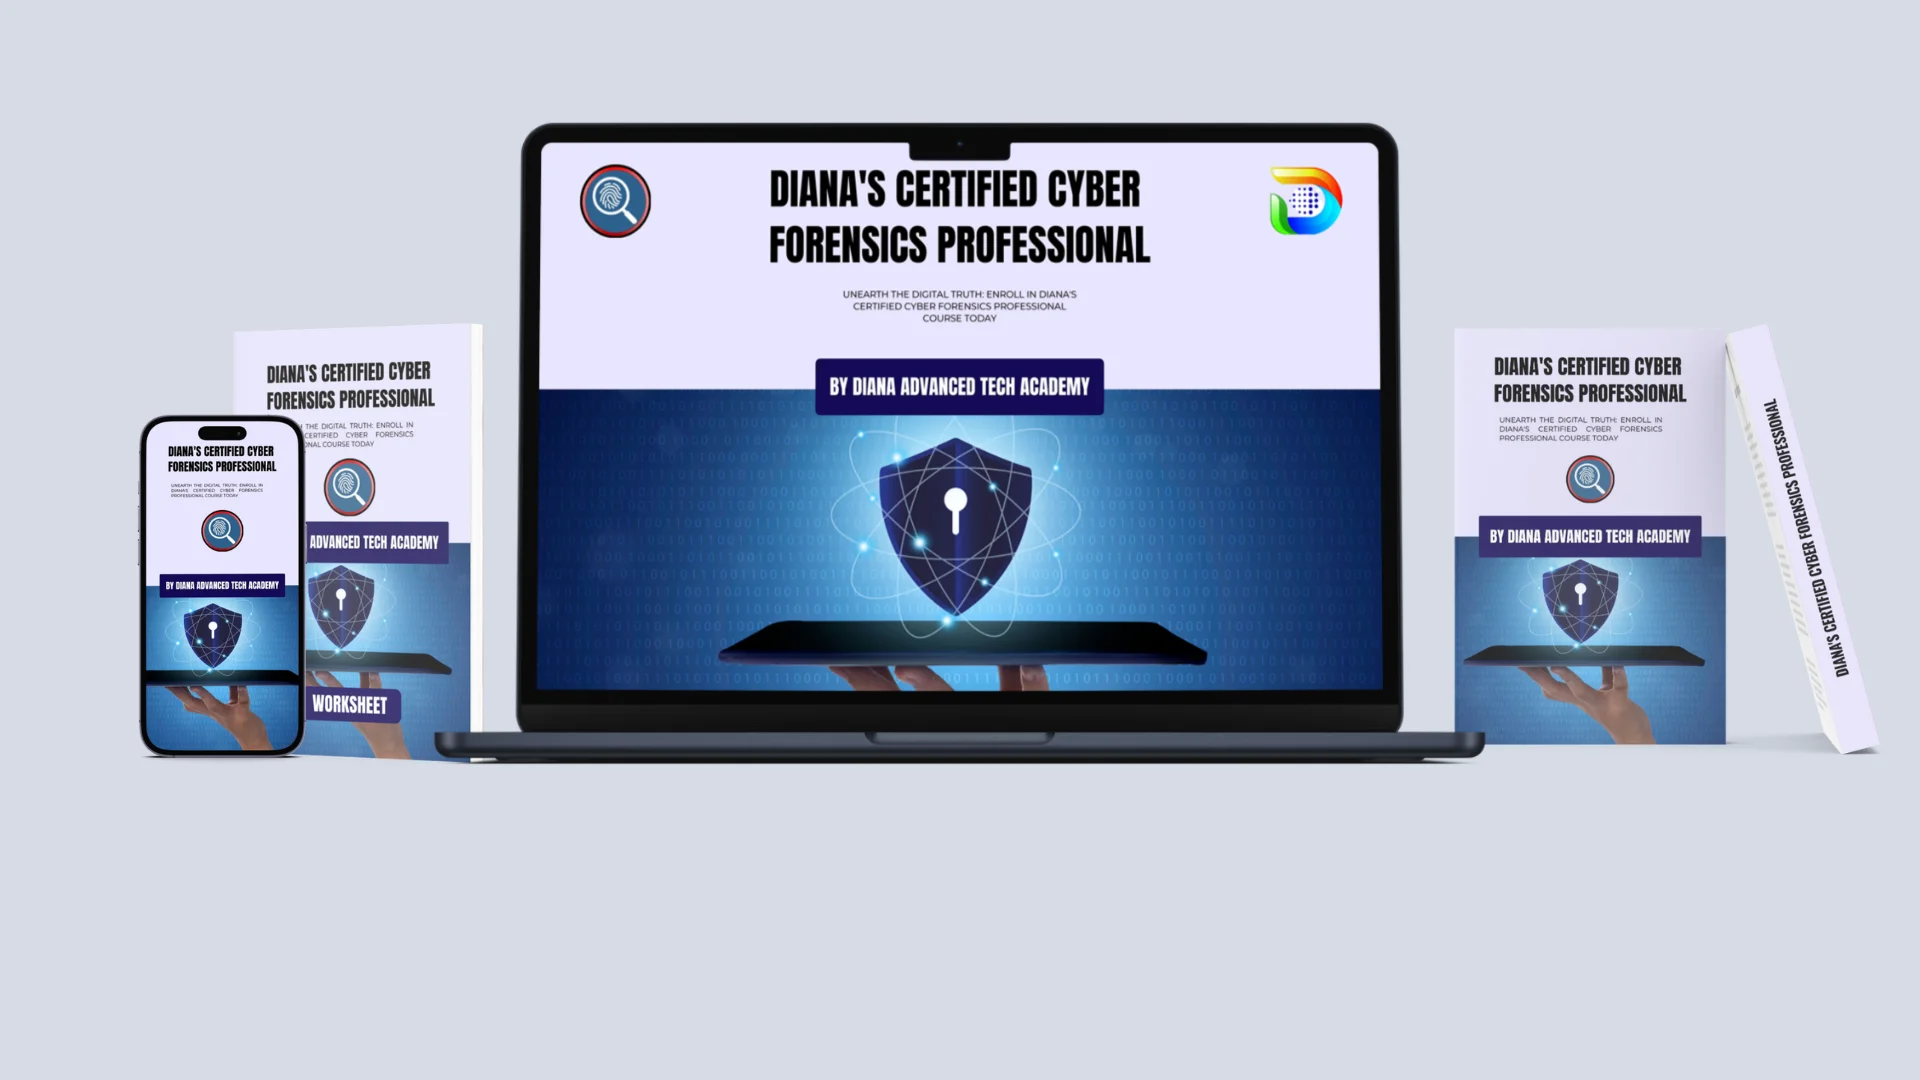 DIANA CERTIFIED CYBER FORENSICS PROFESSIONAL (DCFP)